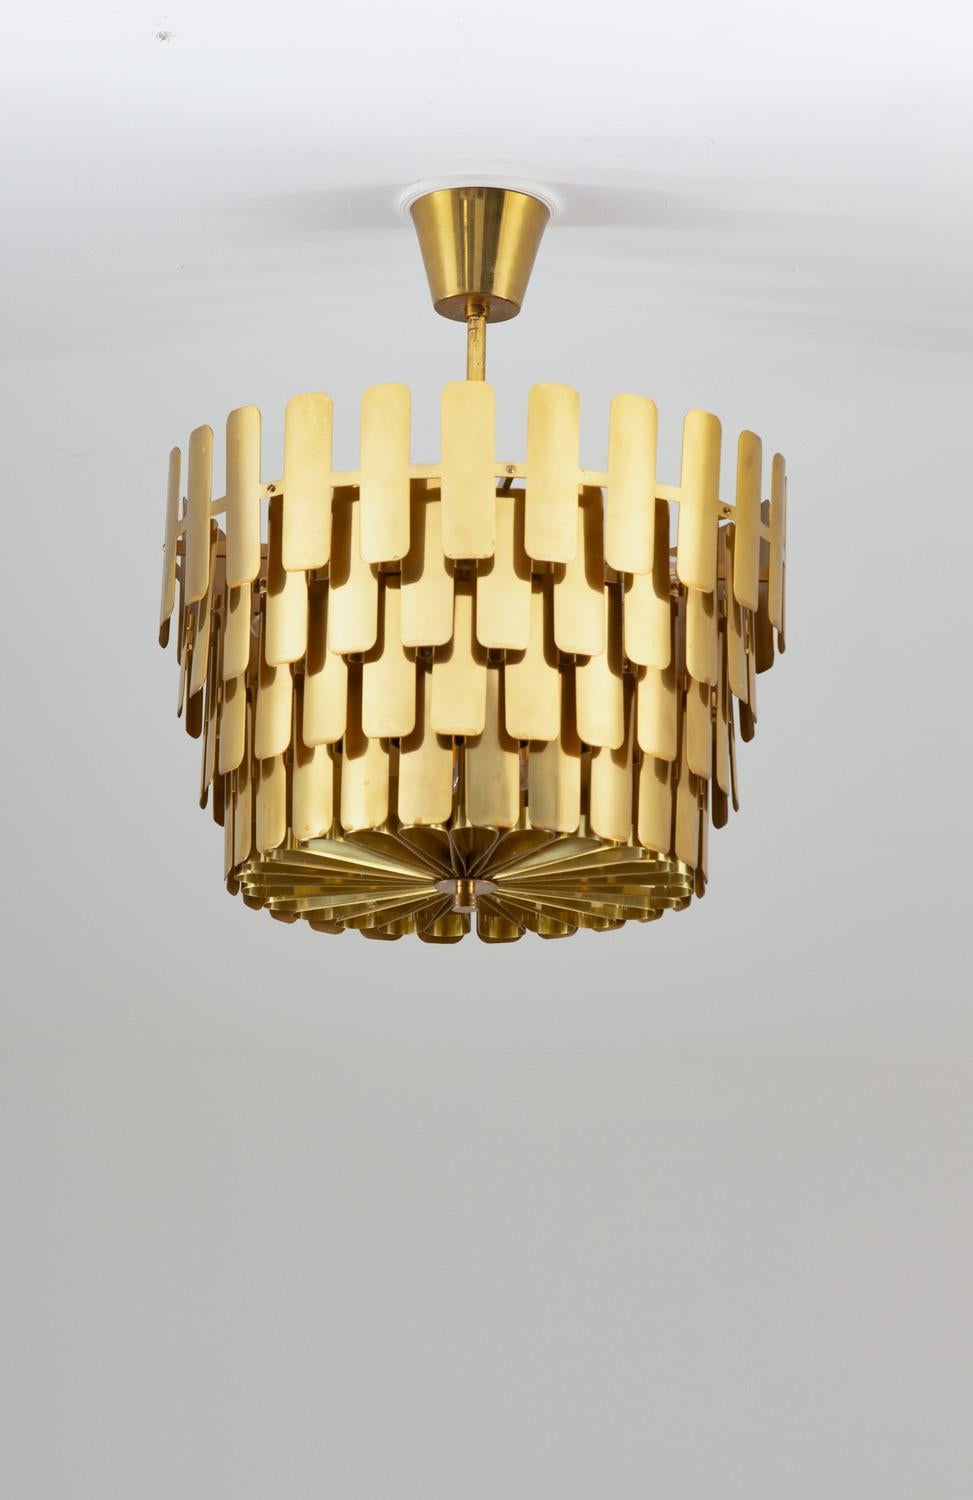 Rare large pendant by Swedish manufacturer Tyringe Konsthantverk.
This impressive lamp is made of brass with a shade constructed by lamellae on different levels. It offers eight light sources hidden by the diffuser that is in the same style as the